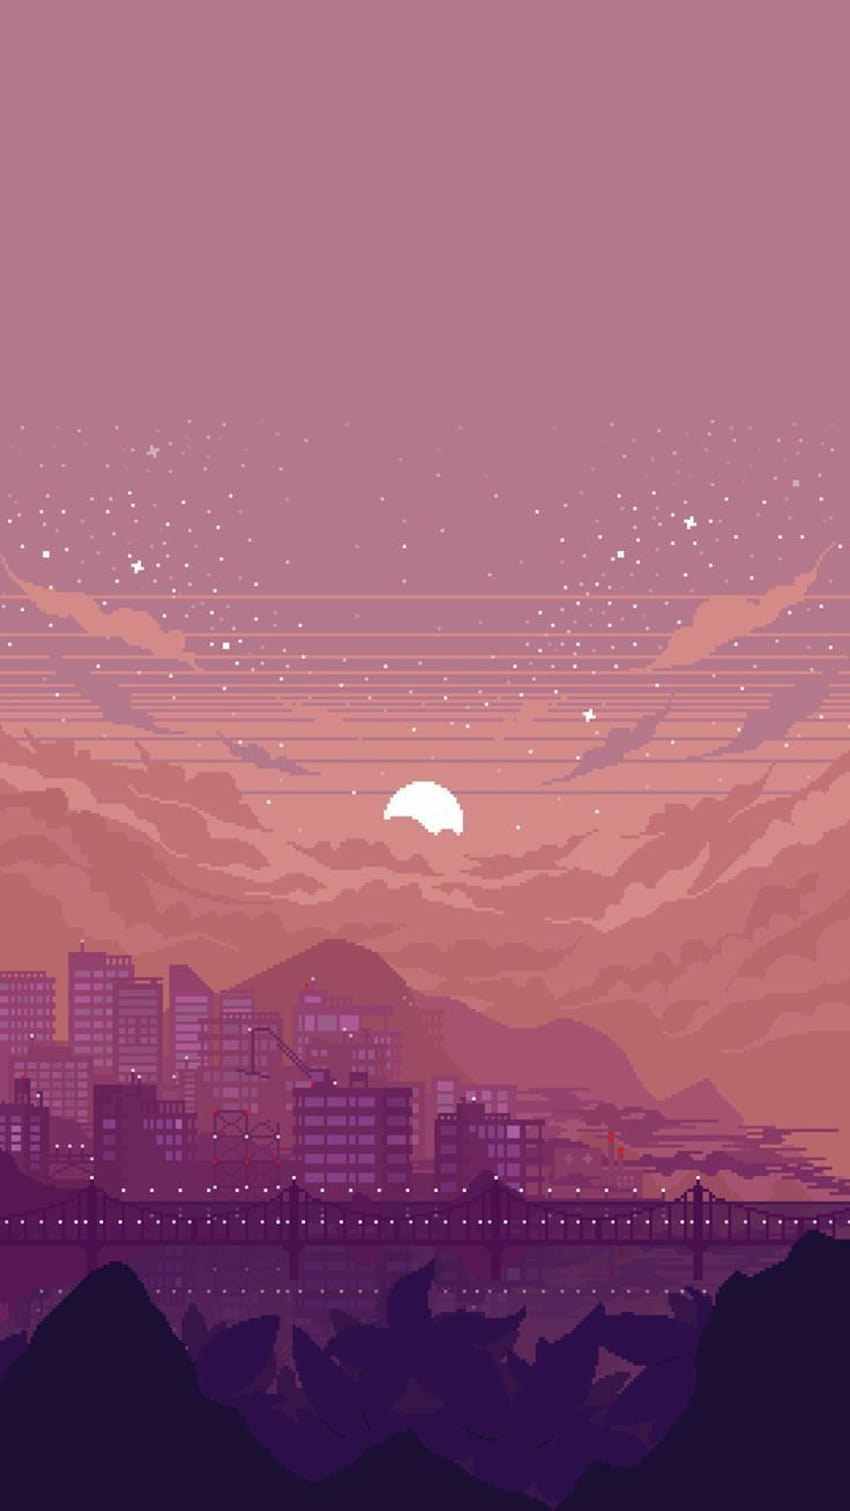 A cityscape with mountains and water in the background - Pixel art